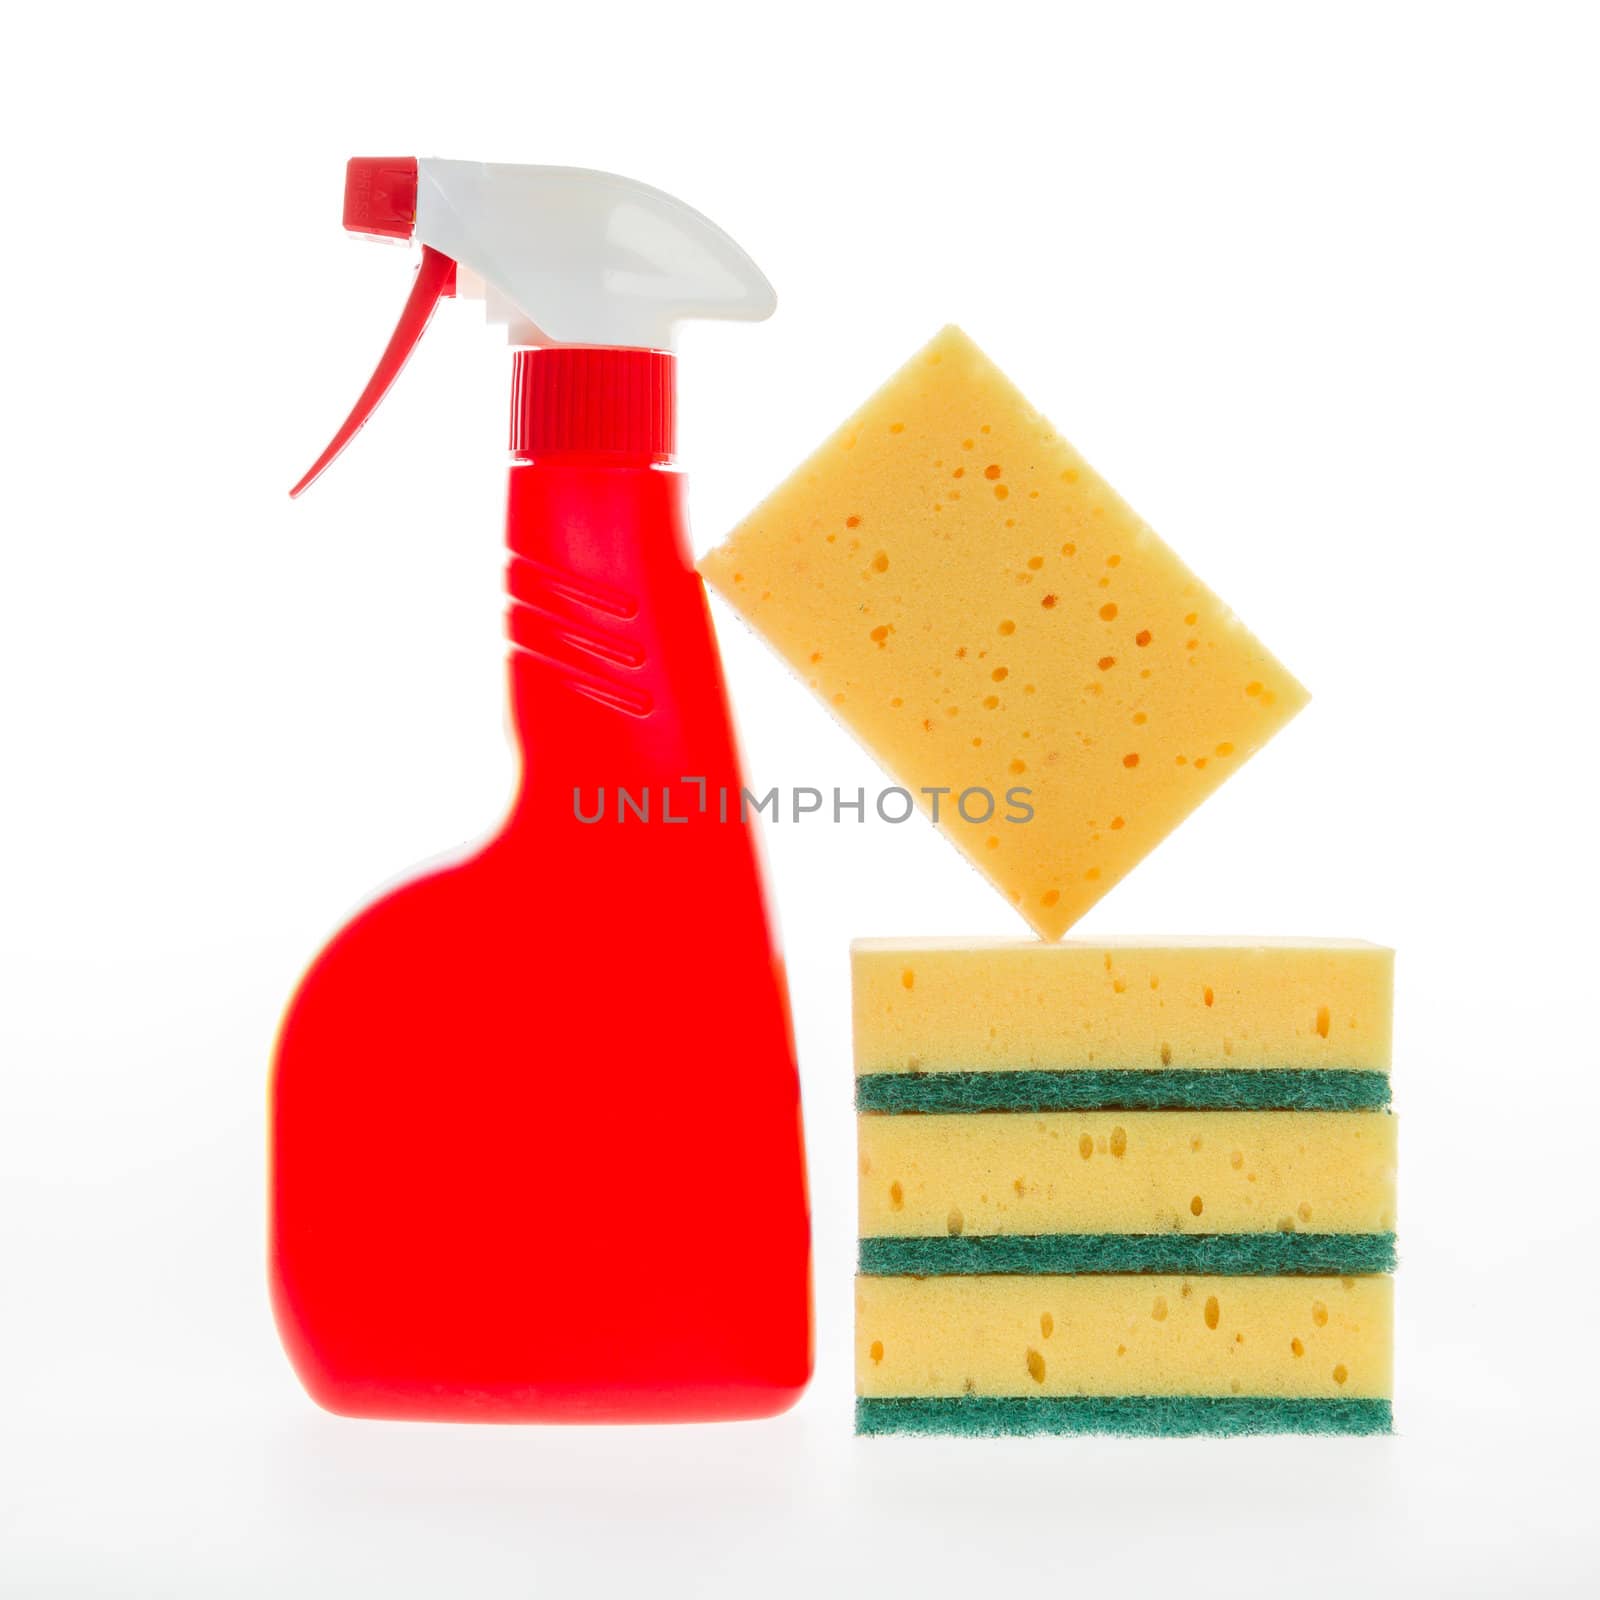 House cleaning product. Plastic bottles with detergent and sponge isolated on white background